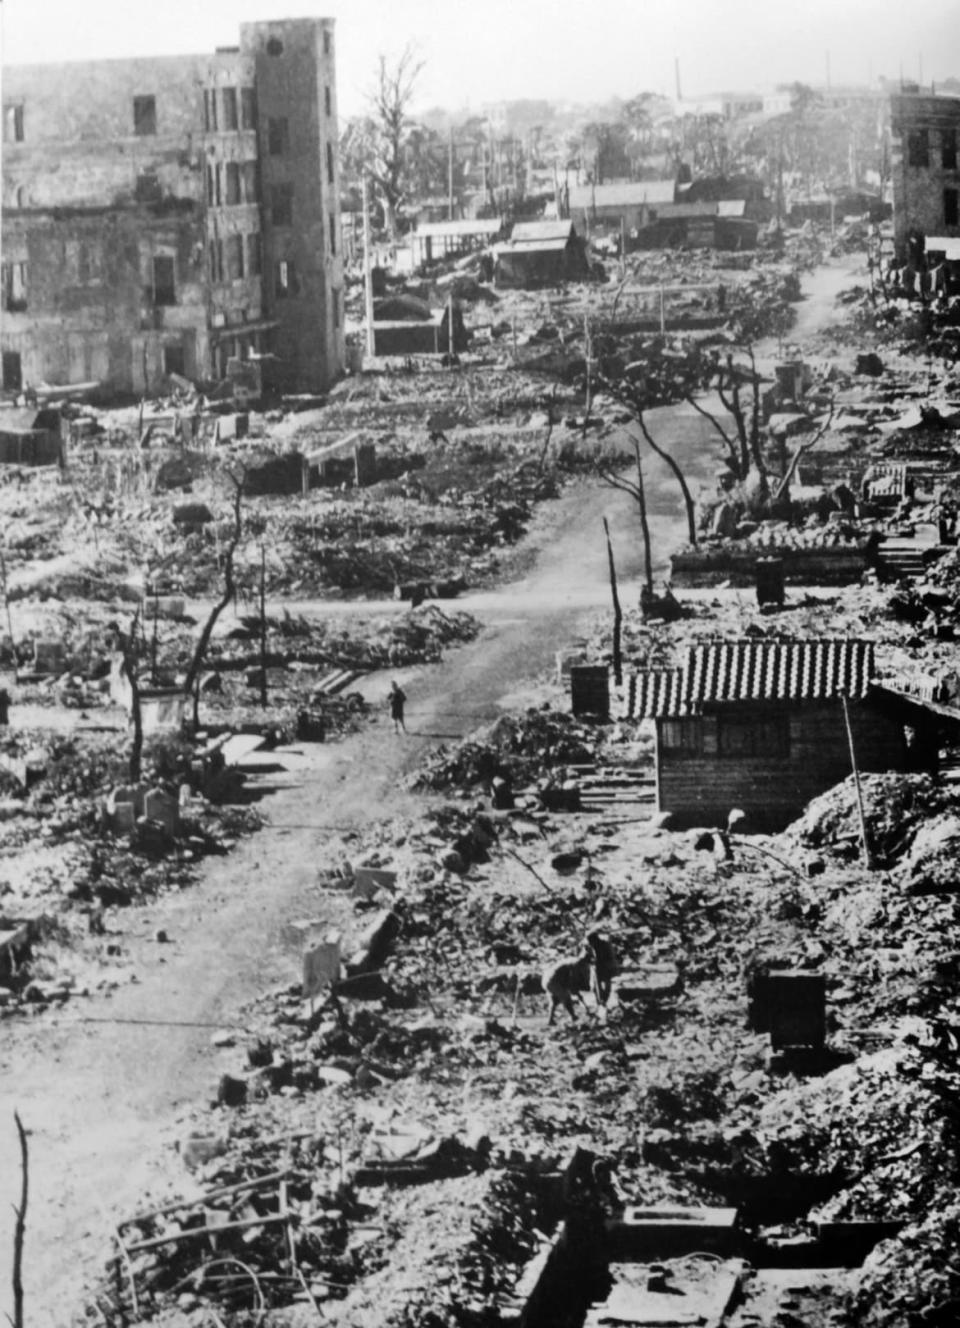 <div class="inline-image__caption"><p>The ruins of Tokyo after the Allied bombing during the nights of the 9th and 10th March 1945. During the raids 279 aircraft launched 1665 tonnes of incendiary projectiles at the city.</p></div> <div class="inline-image__credit">Photo 12/Universal Images Group via Getty Images</div>